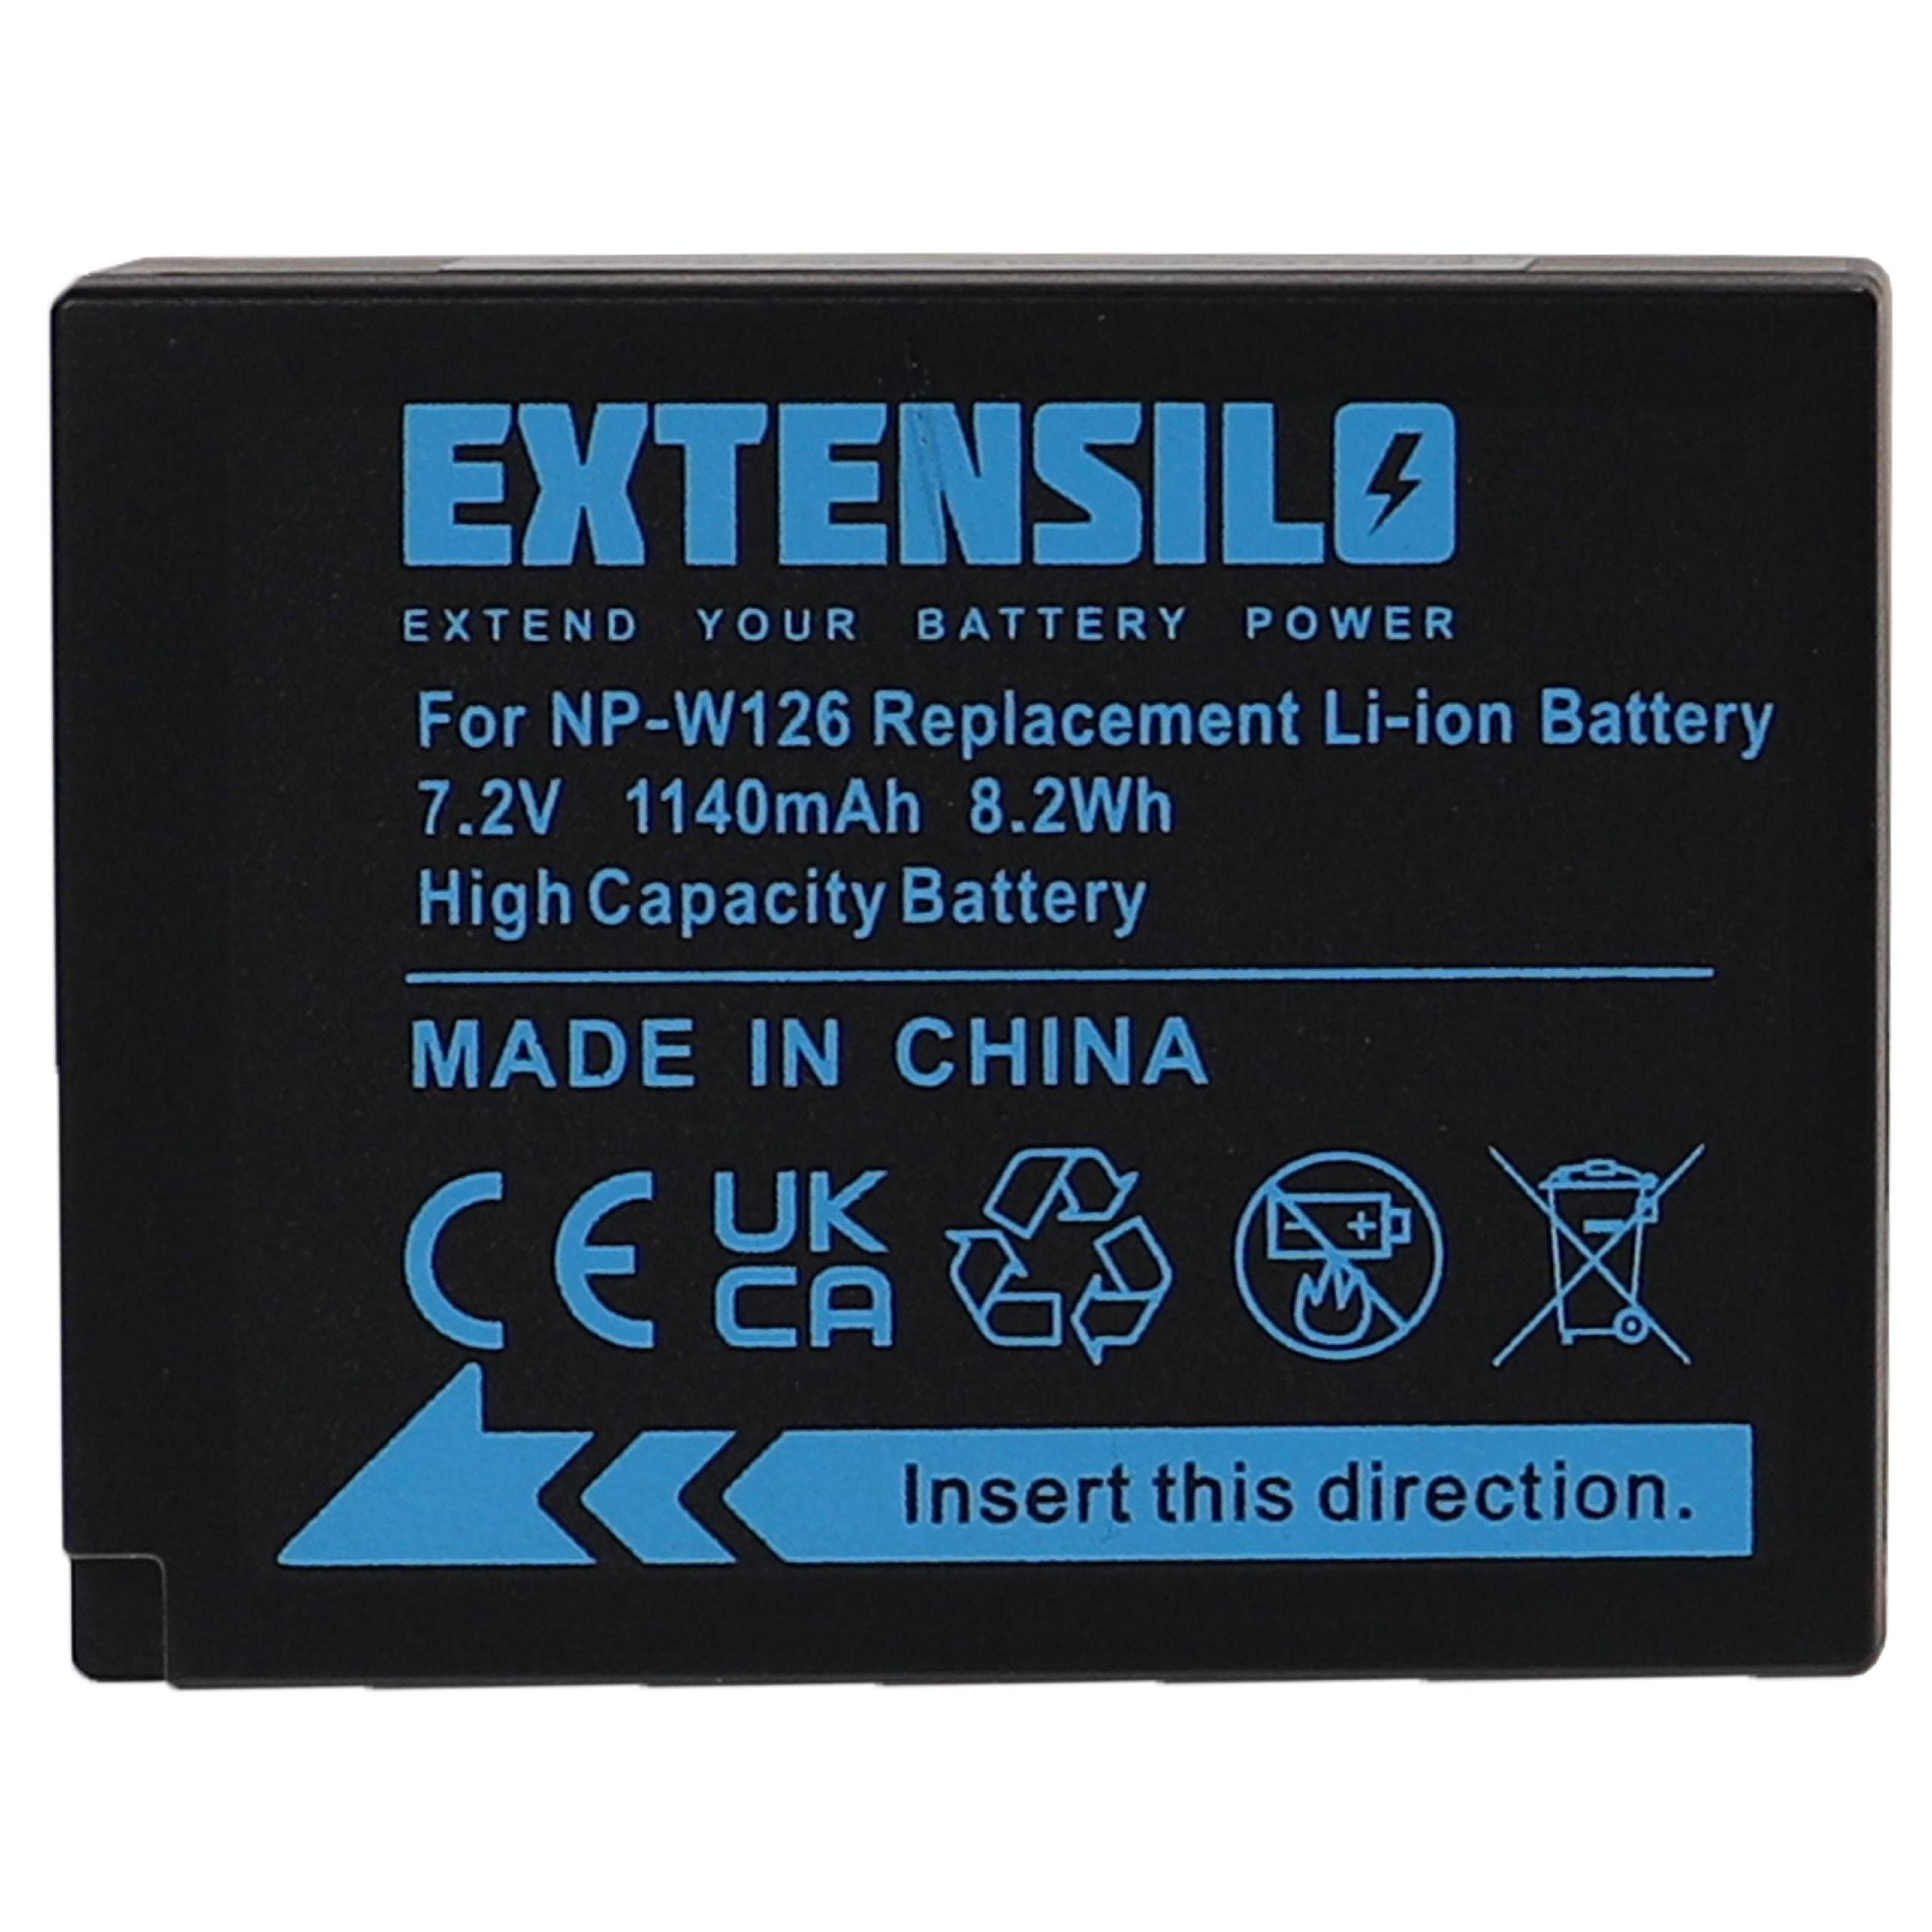 Battery Replacement for Fujifilm NP-W126, NP-W126s - 1140mAh, 7.2V, Li-Ion